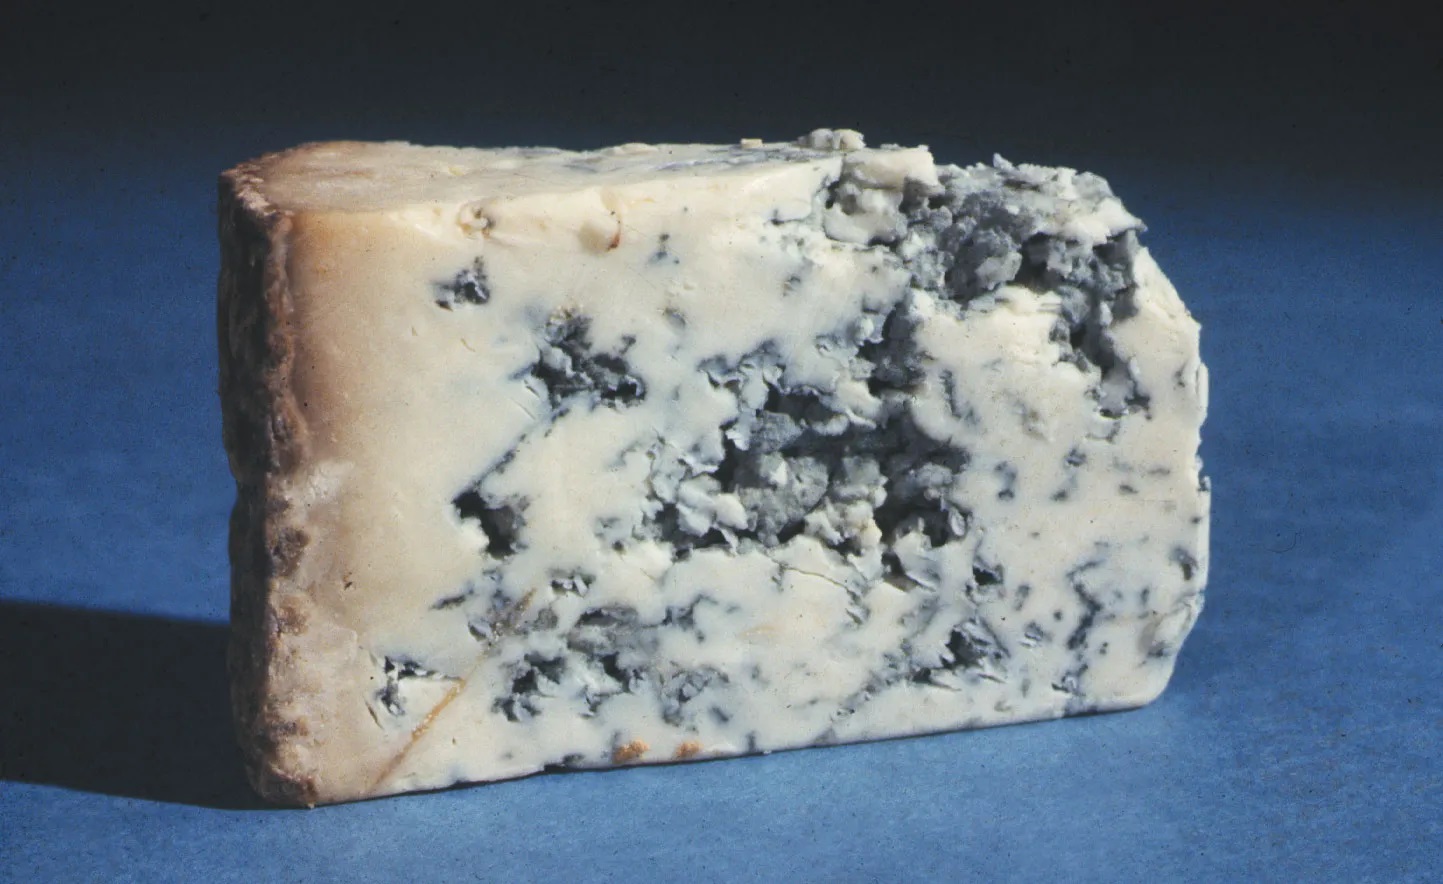 18-blue-cheese-nutritional-facts